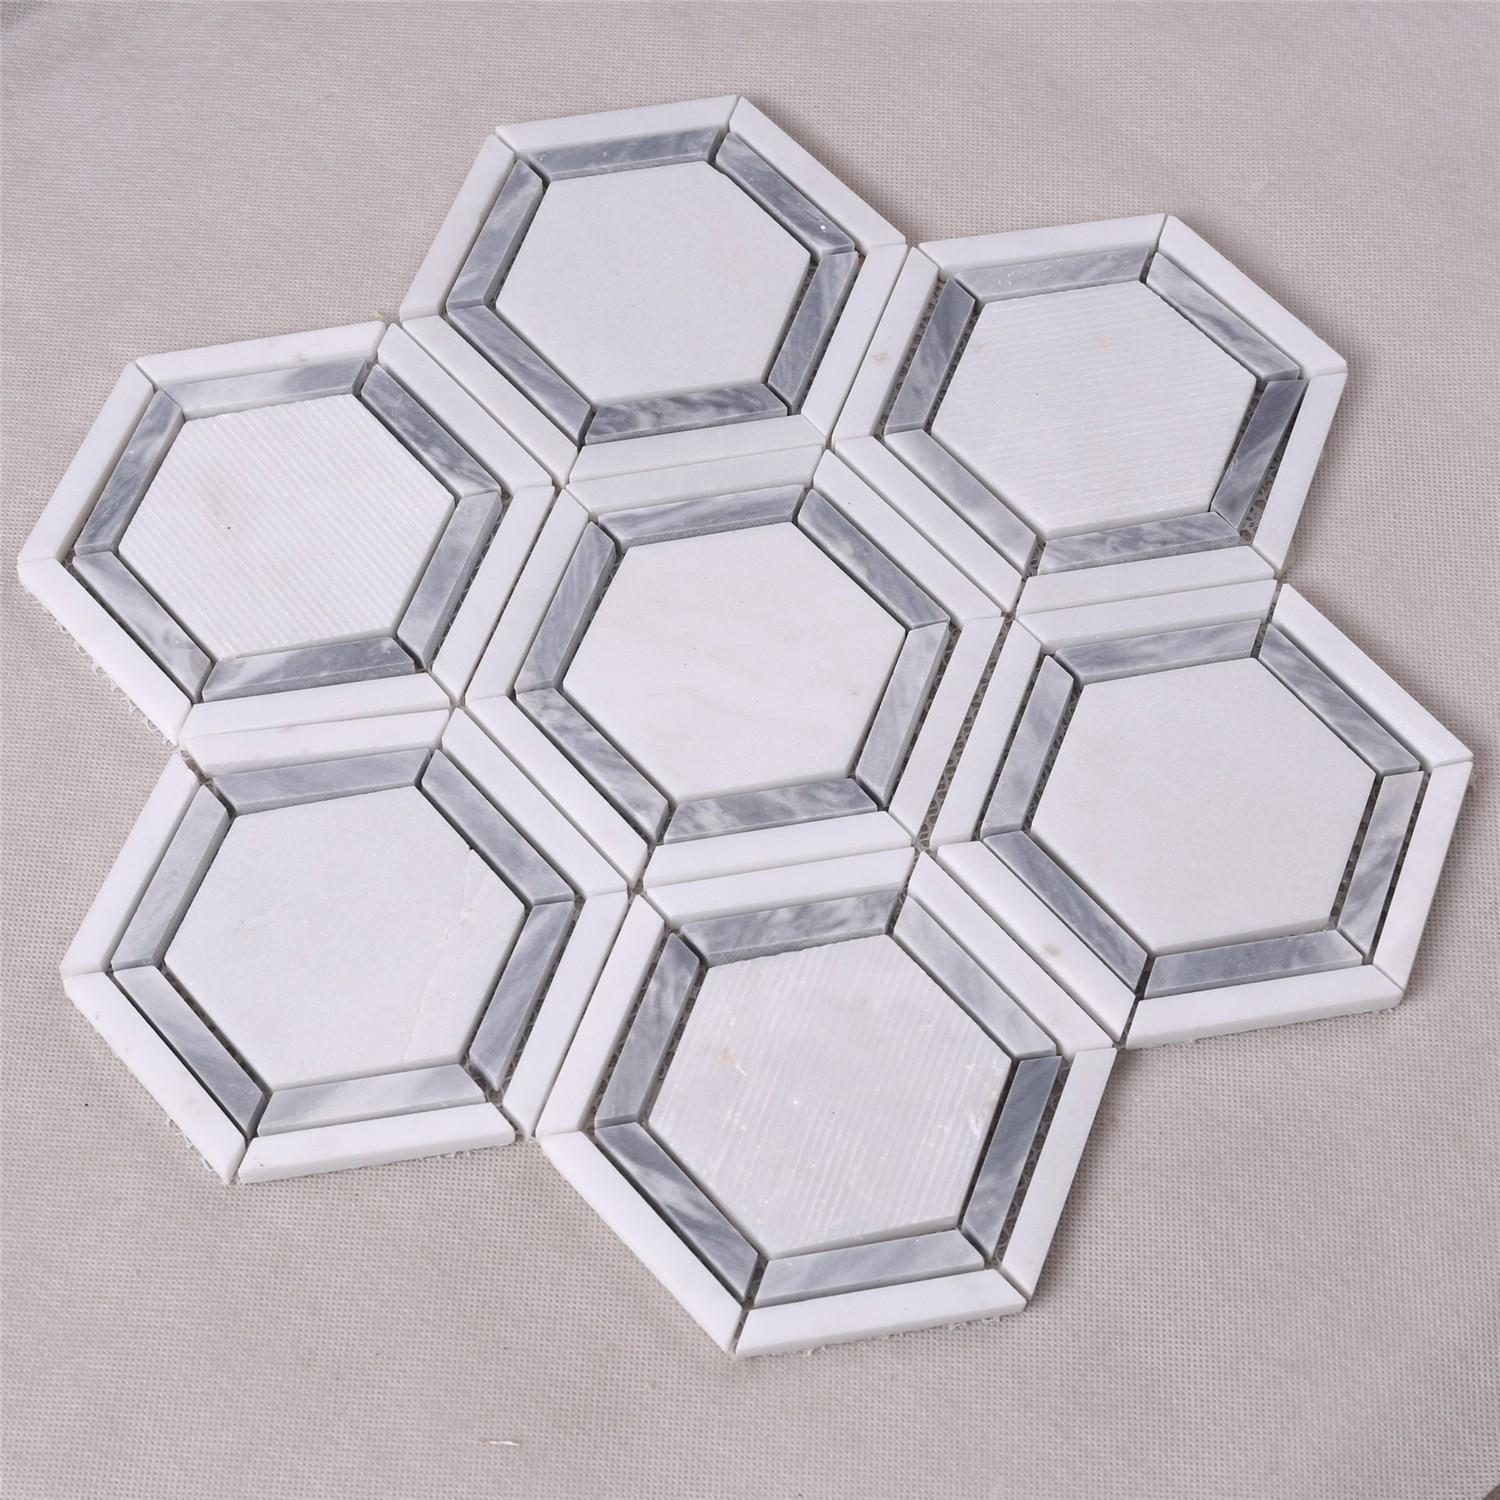 reliable crystal glass mosaic tiles suppliers white series for villa